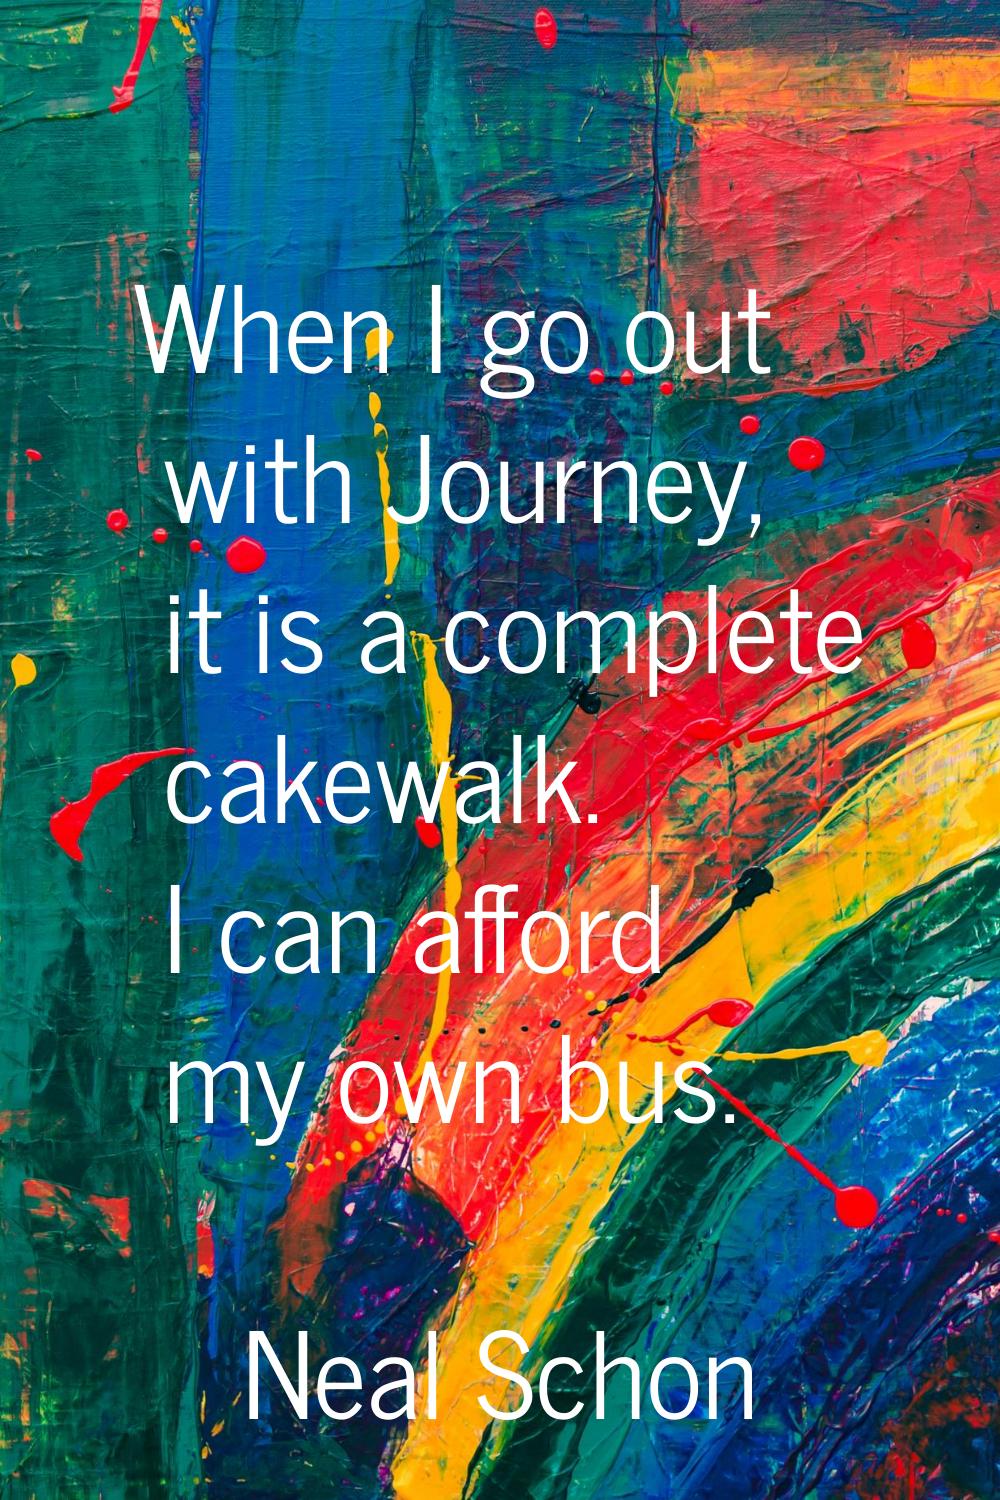 When I go out with Journey, it is a complete cakewalk. I can afford my own bus.